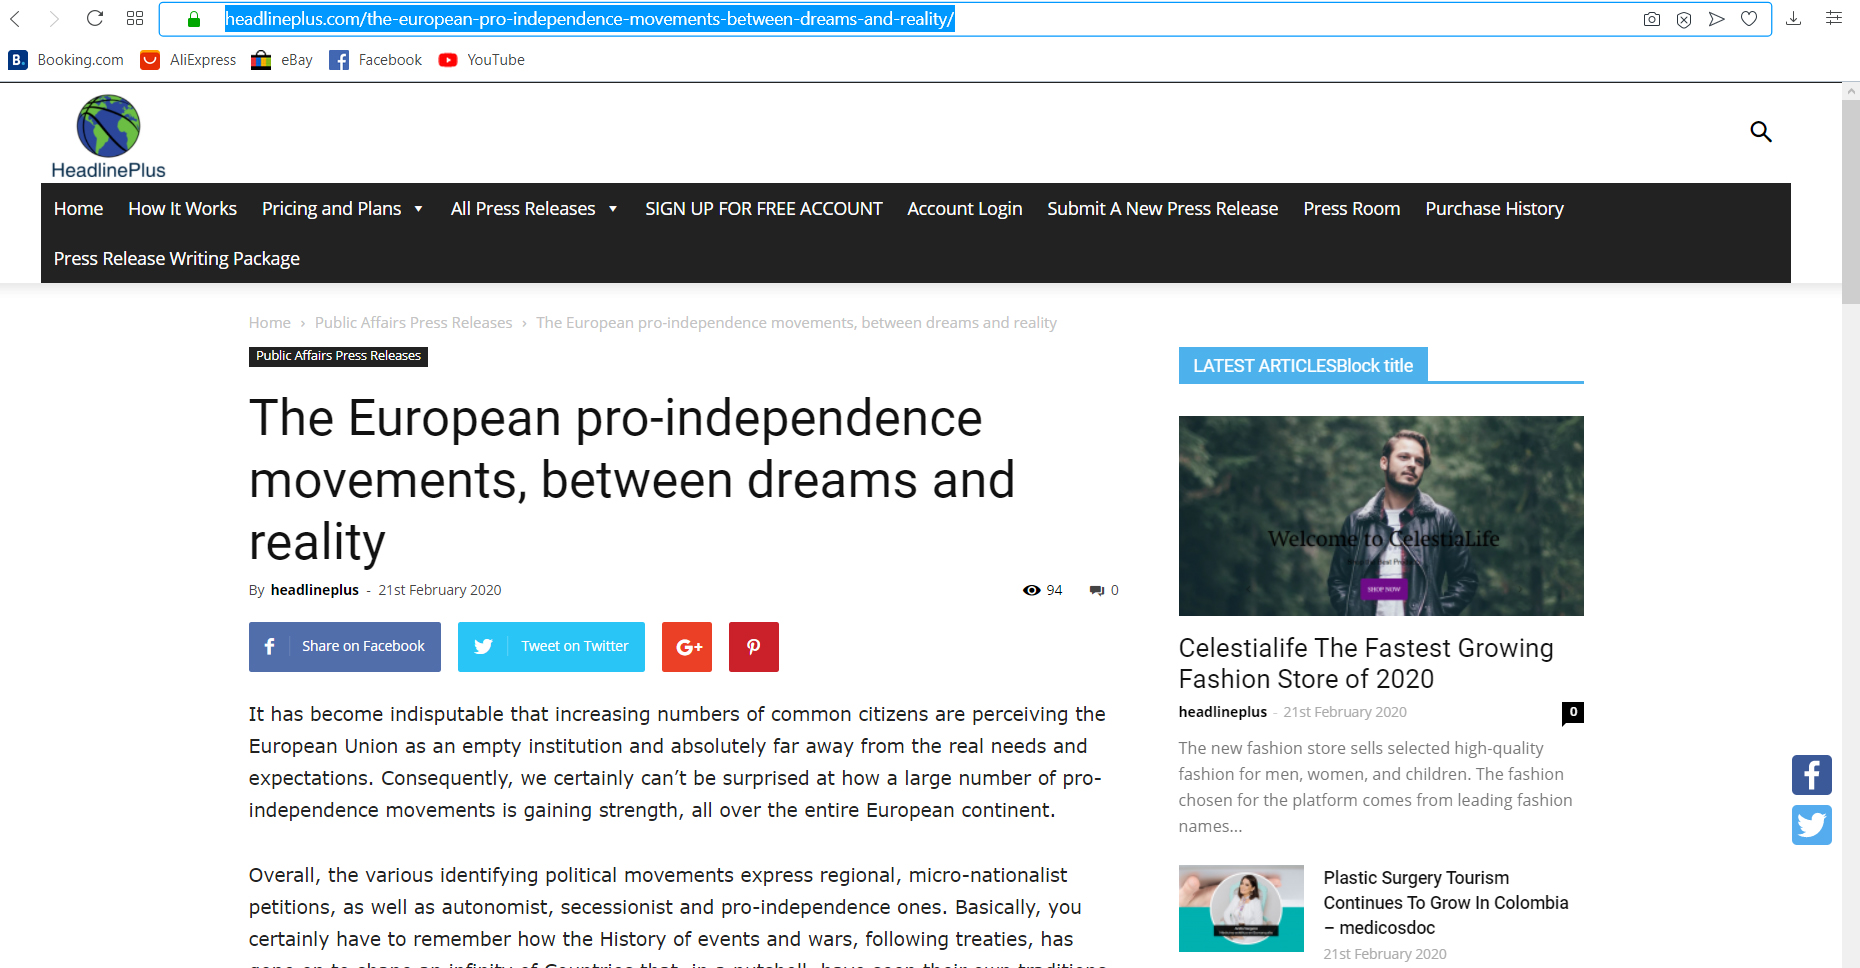 The European pro-independence movements